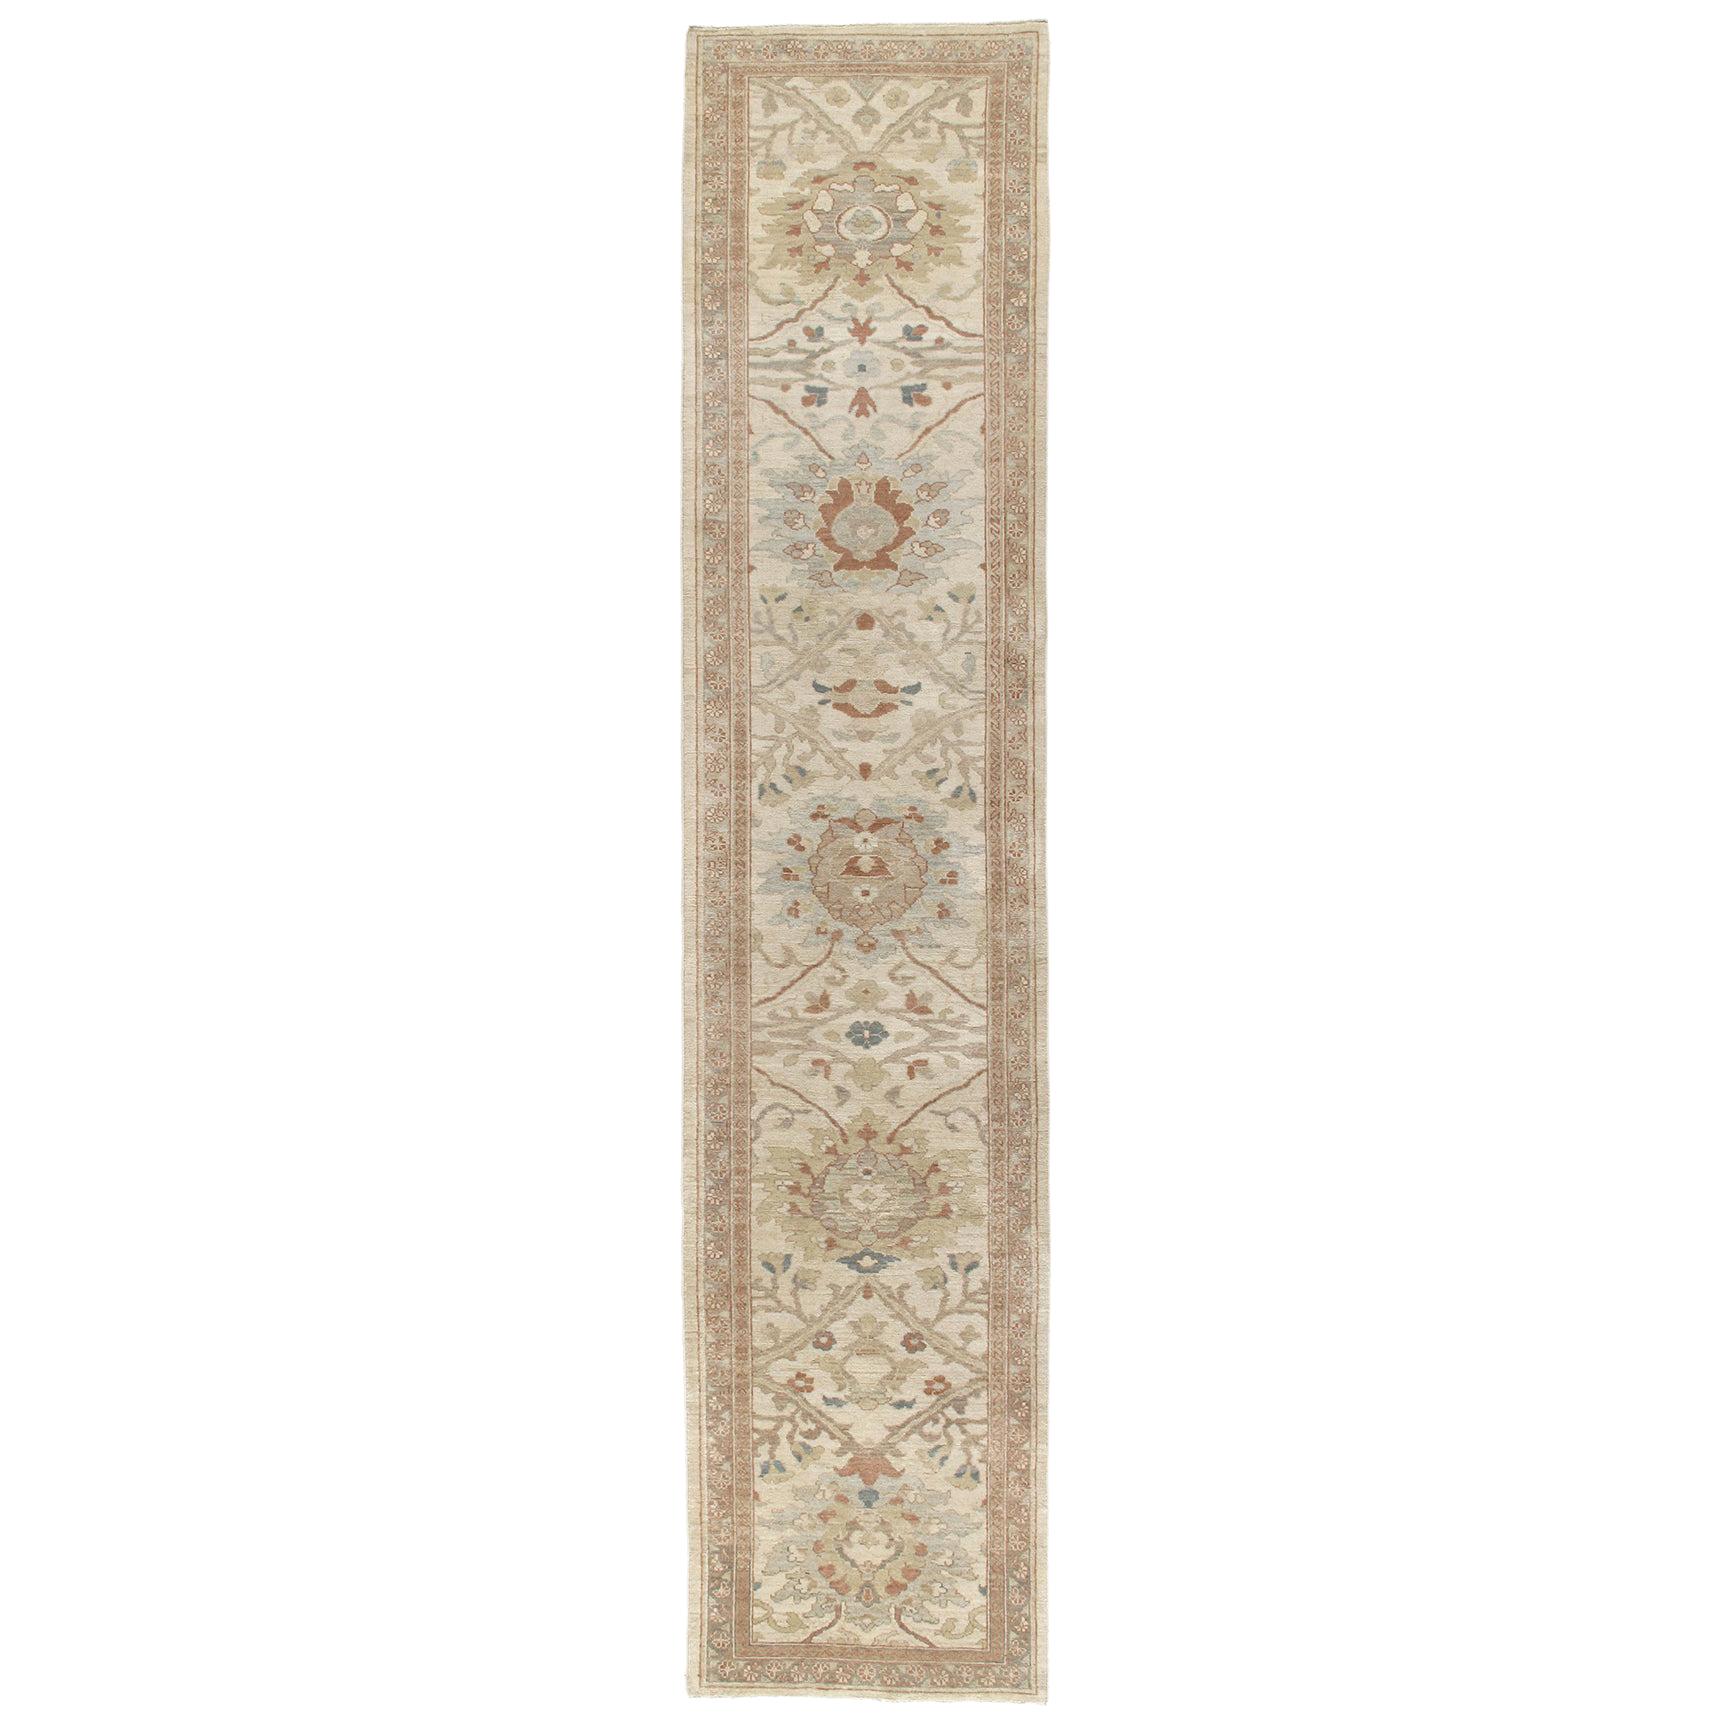 Persian Ziegler Sultanabad Handknotted Runner Rug in Camel and Beige Color For Sale